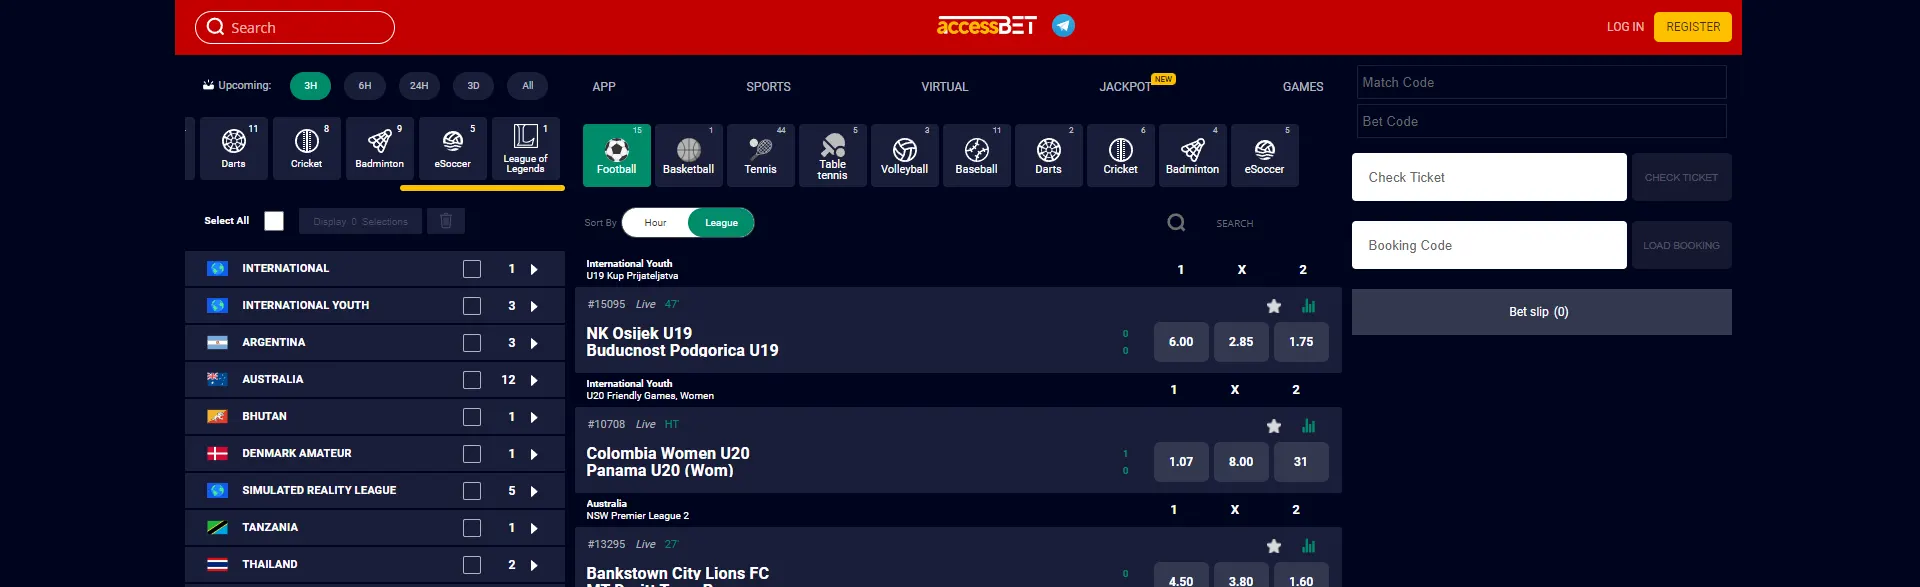 Page with sport bets on football, basketball, tennis and others on AccessBET.